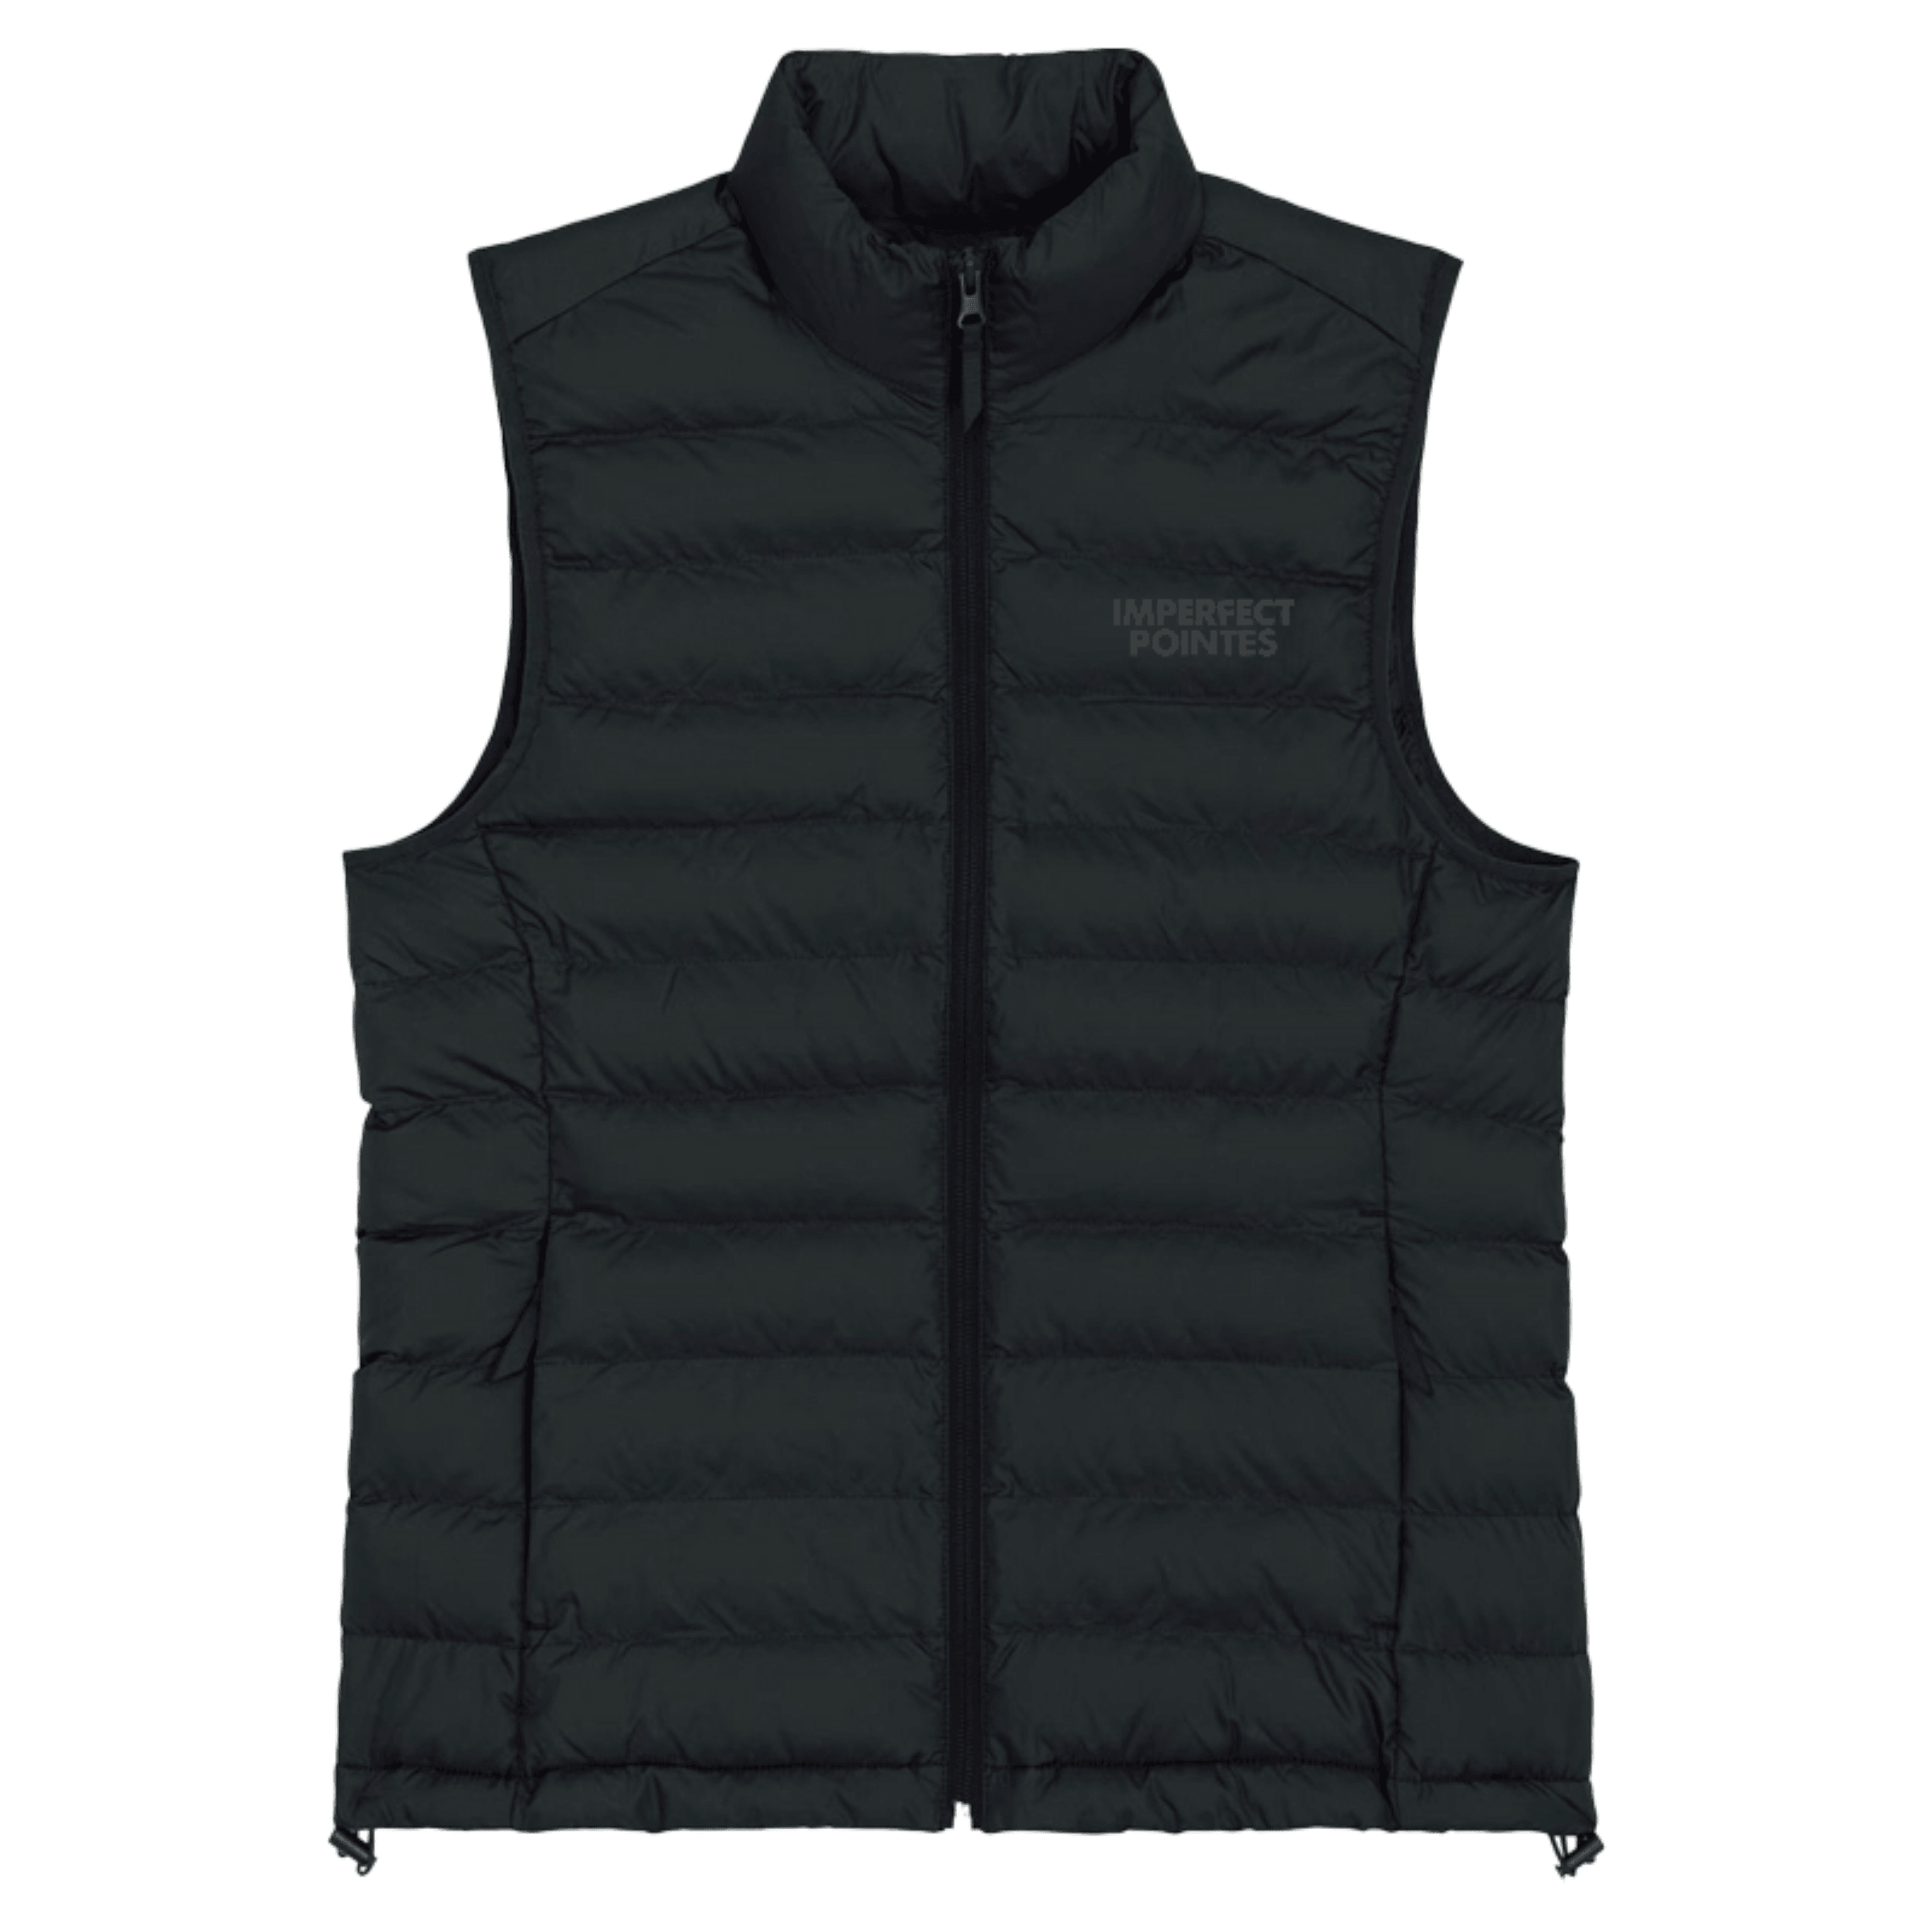 Womens Quilted Bodywarmer Gilet with Embroidered BLACK Logo - Accessories, New, Ready to Ship - Imperfect Pointes